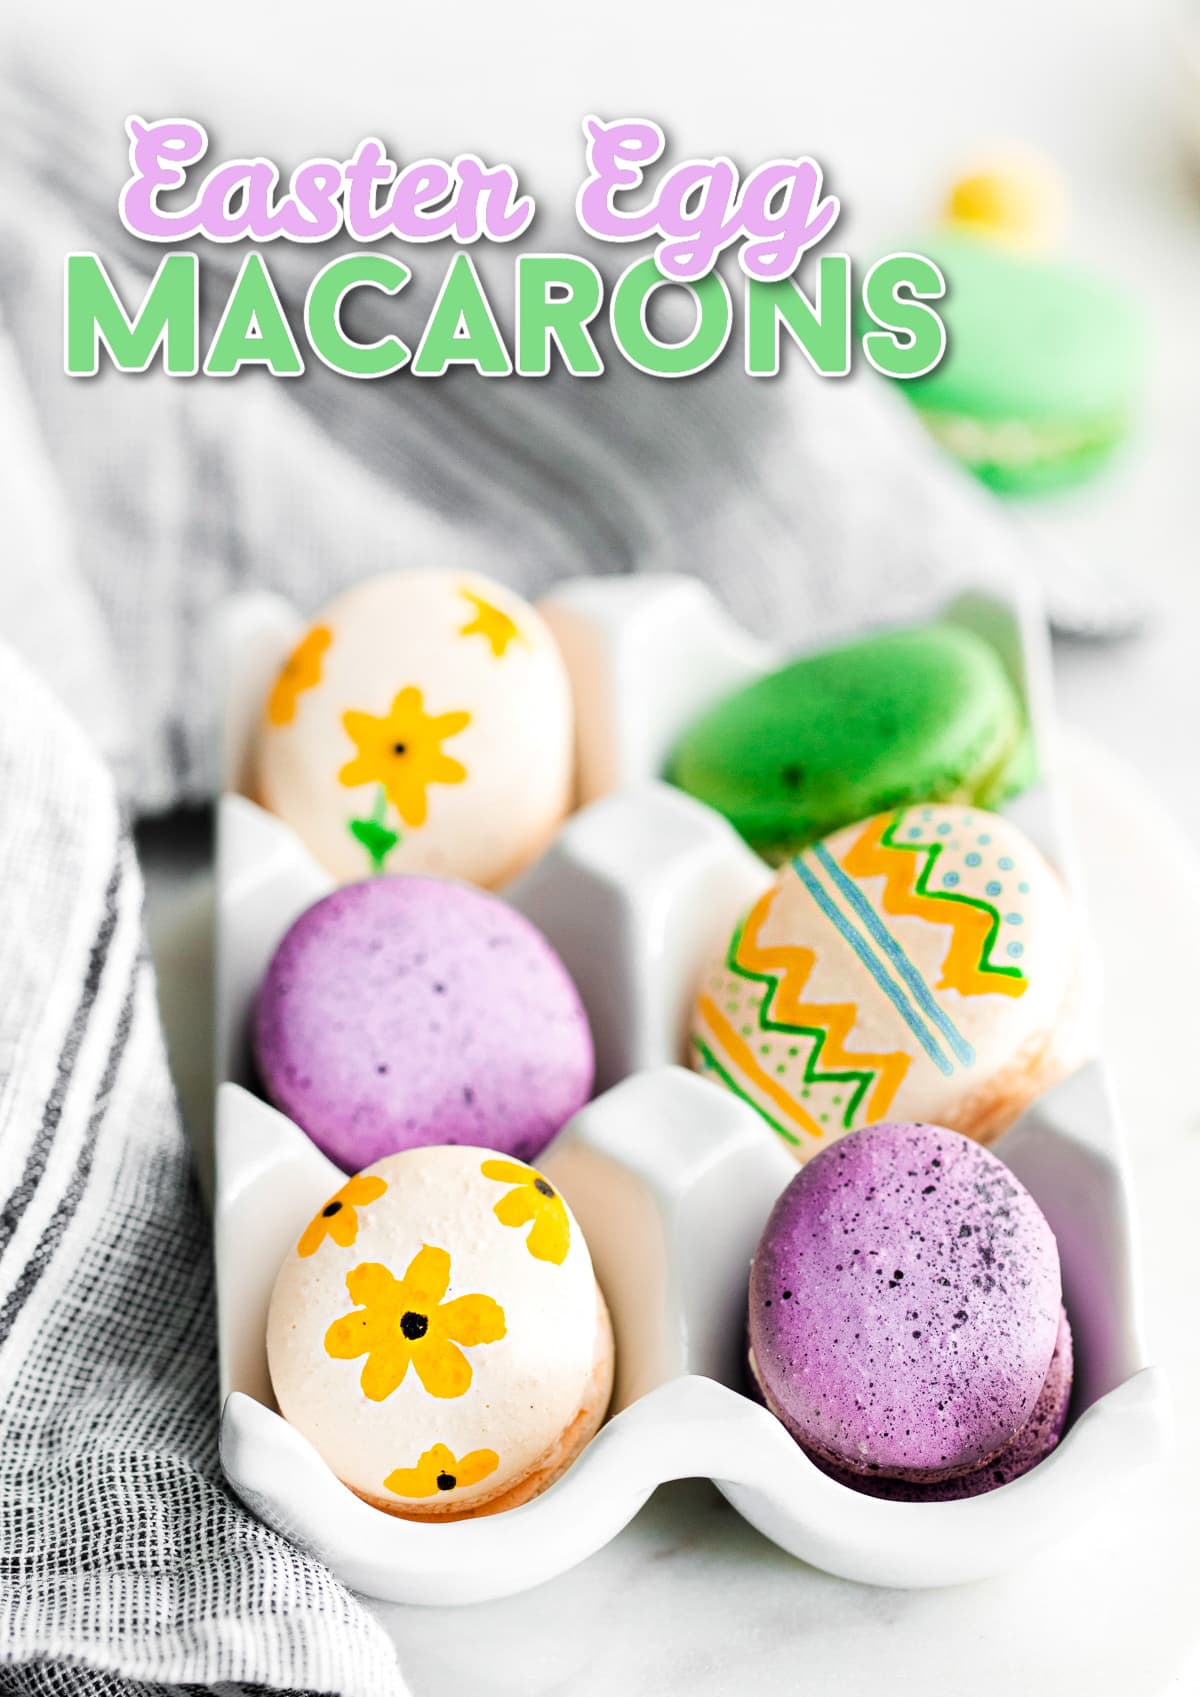 Easter Macarons - Pretty and Delicious! | Mom On Timeout